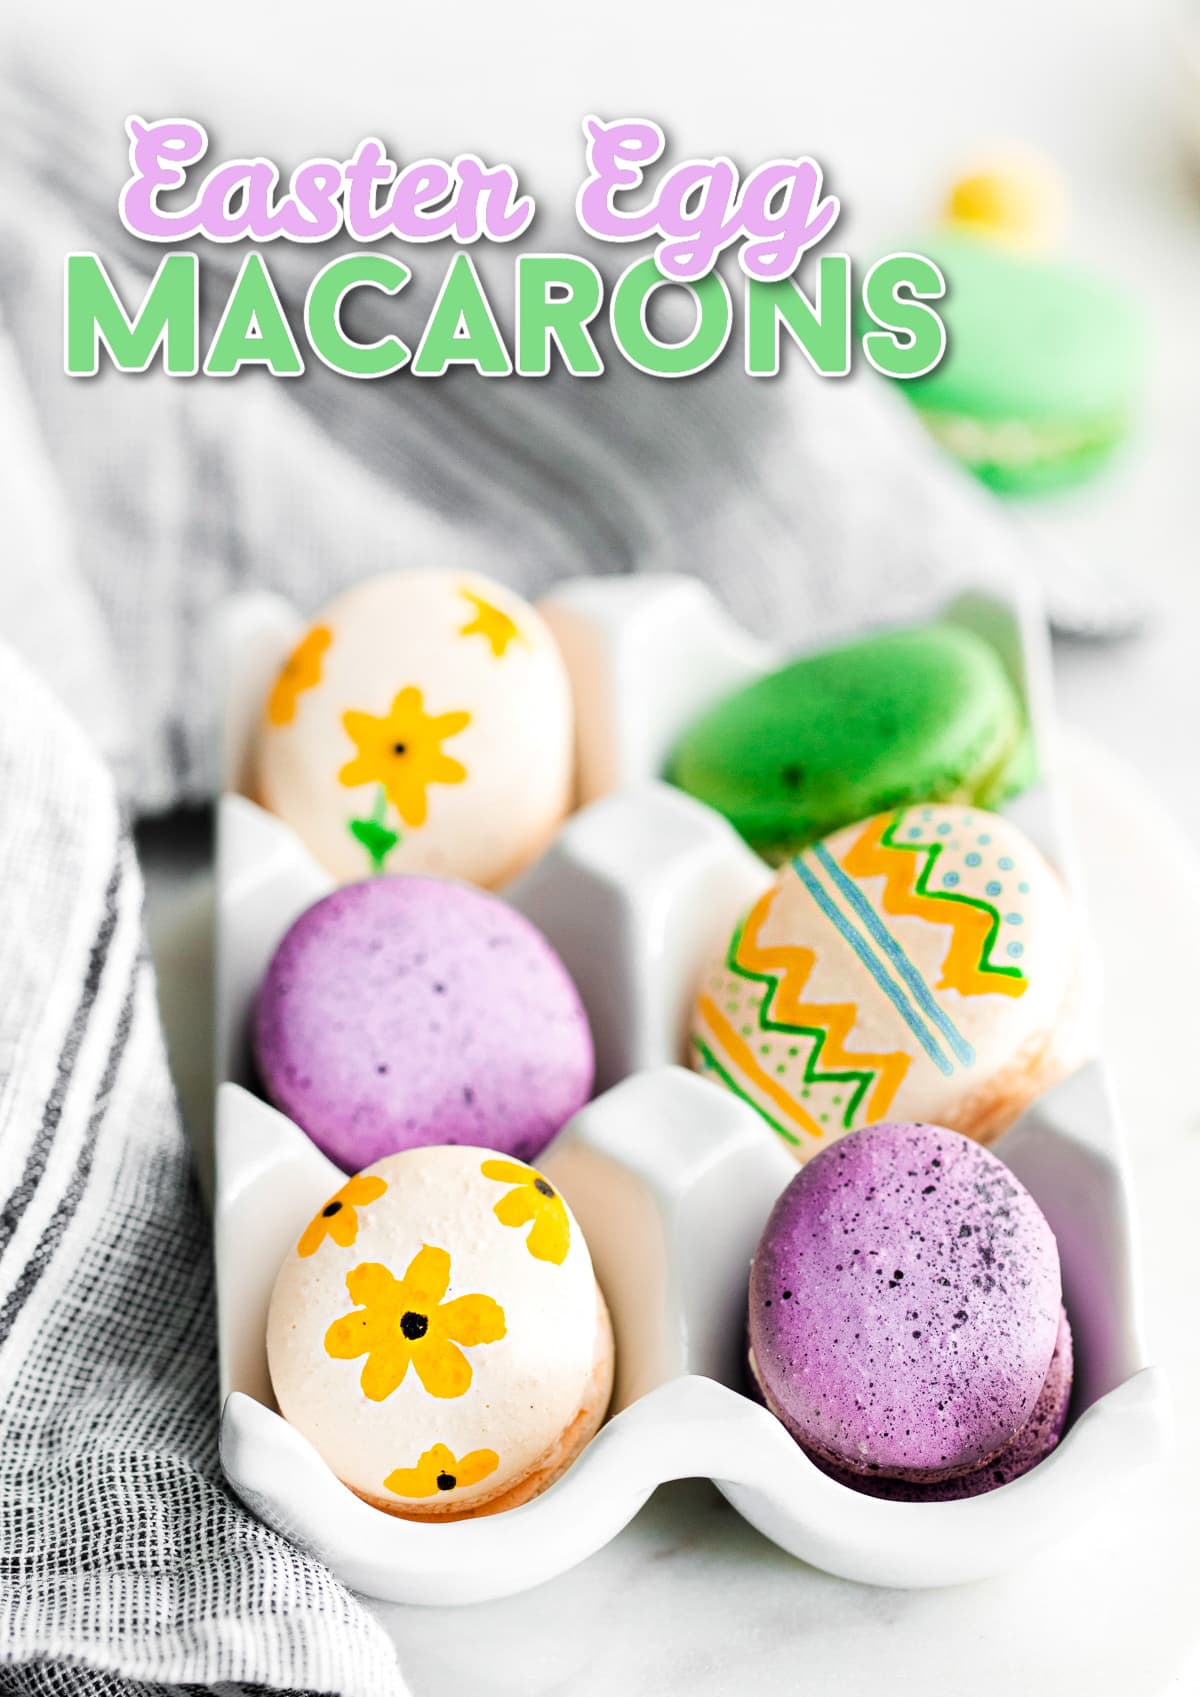 Easter Macarons - Pretty and Delicious! | Mom On Timeout